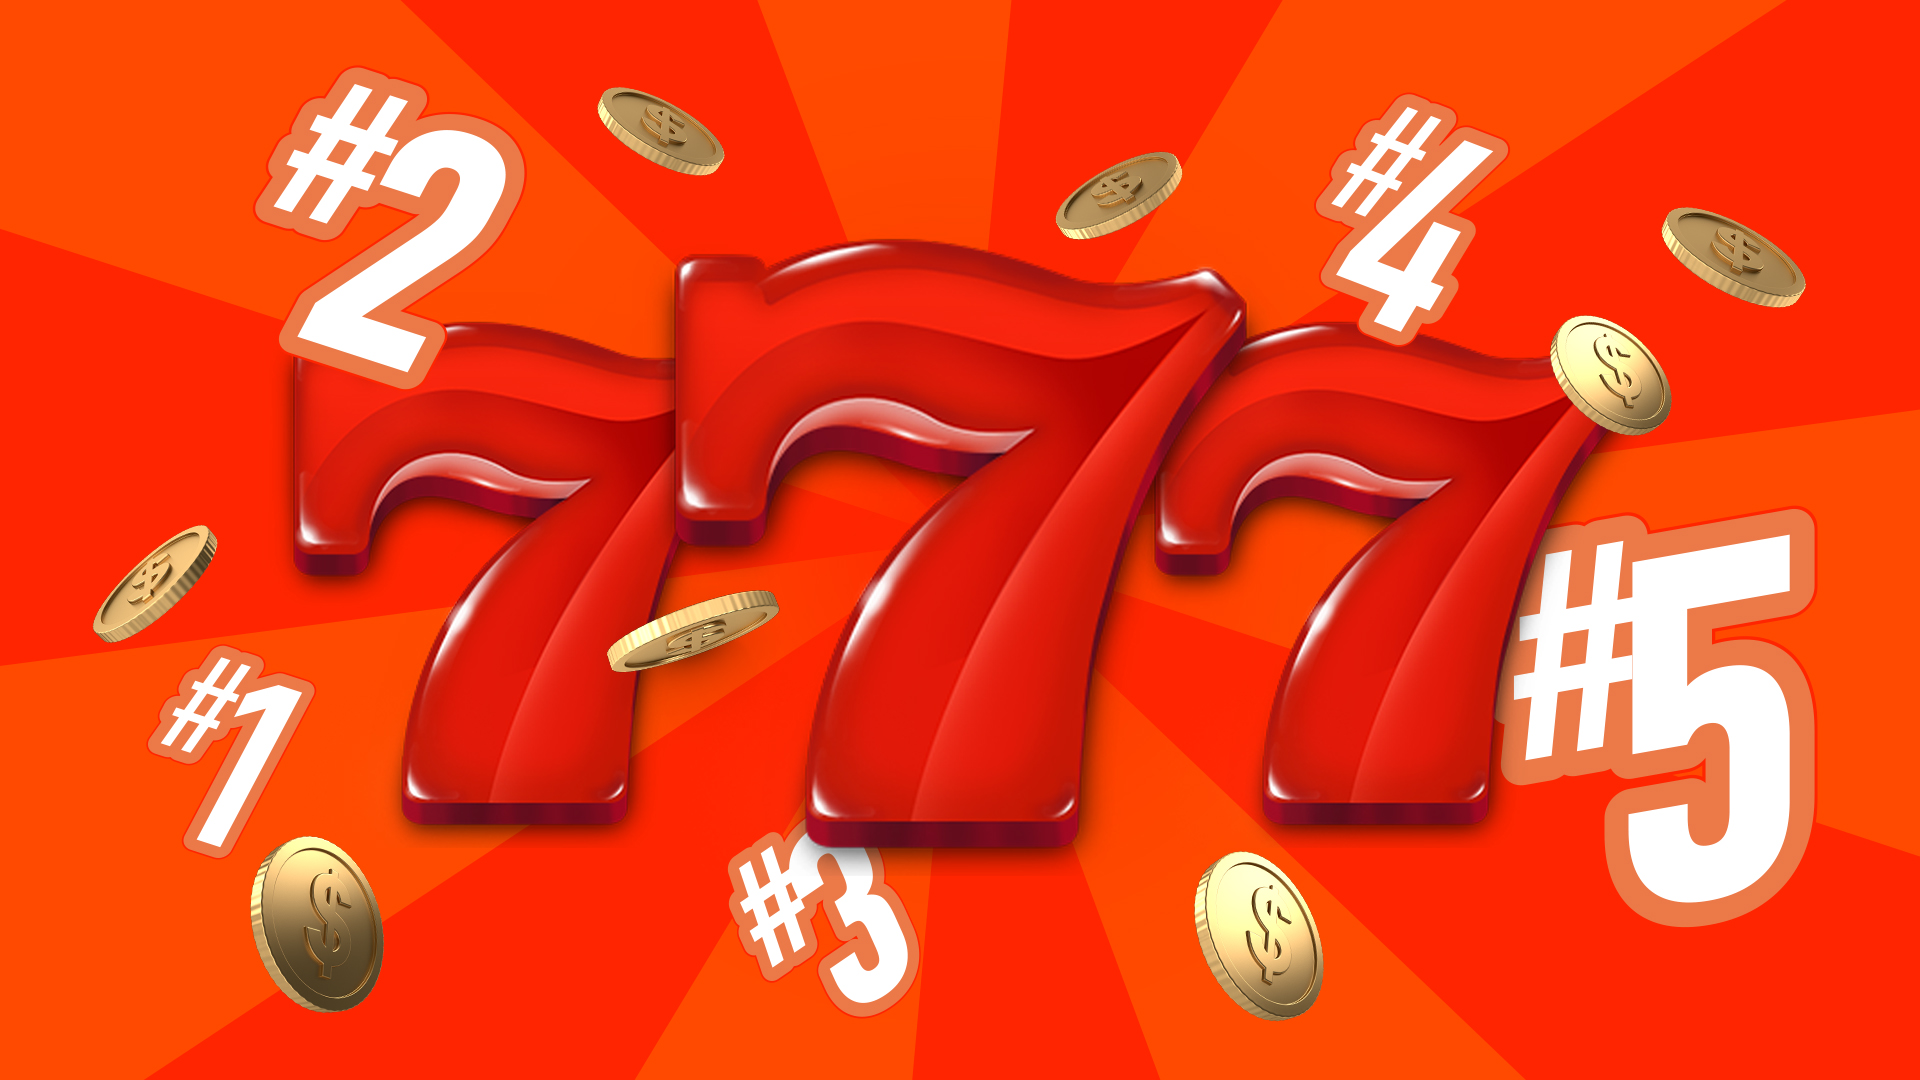 Three large red 7s with numbers and coins surrounding it, on a fiery red background.